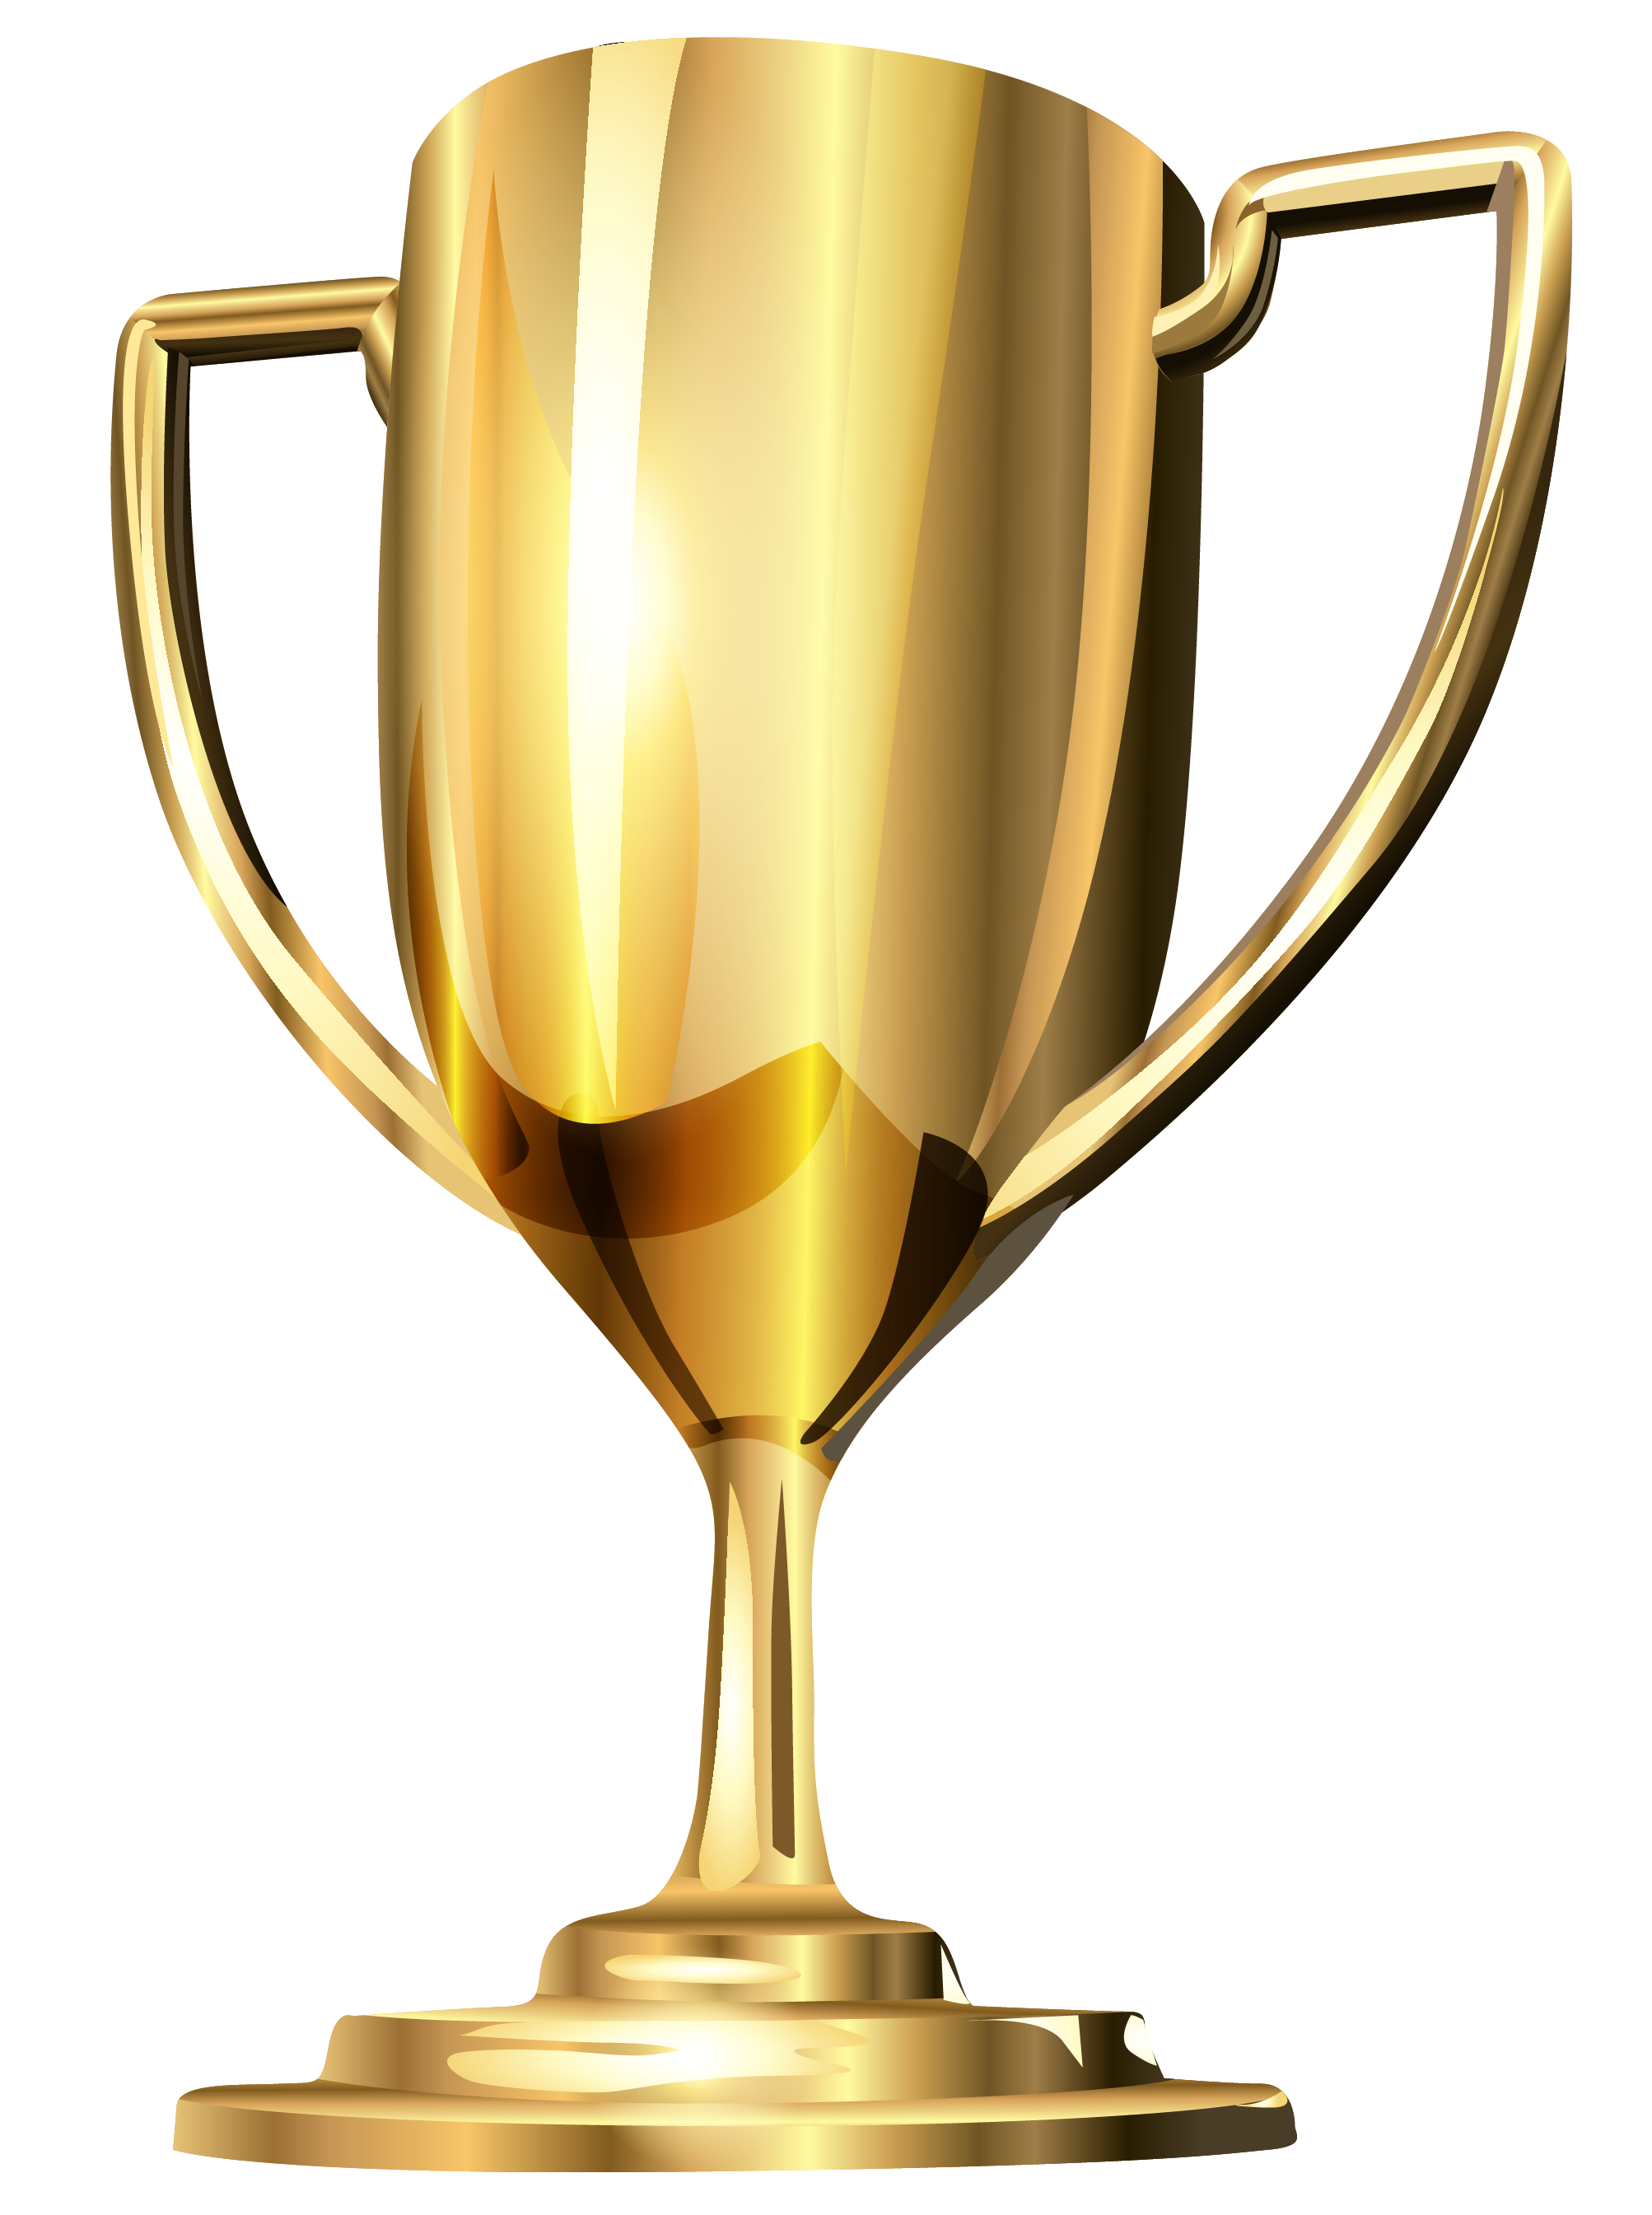 free clipart images trophy - photo #28